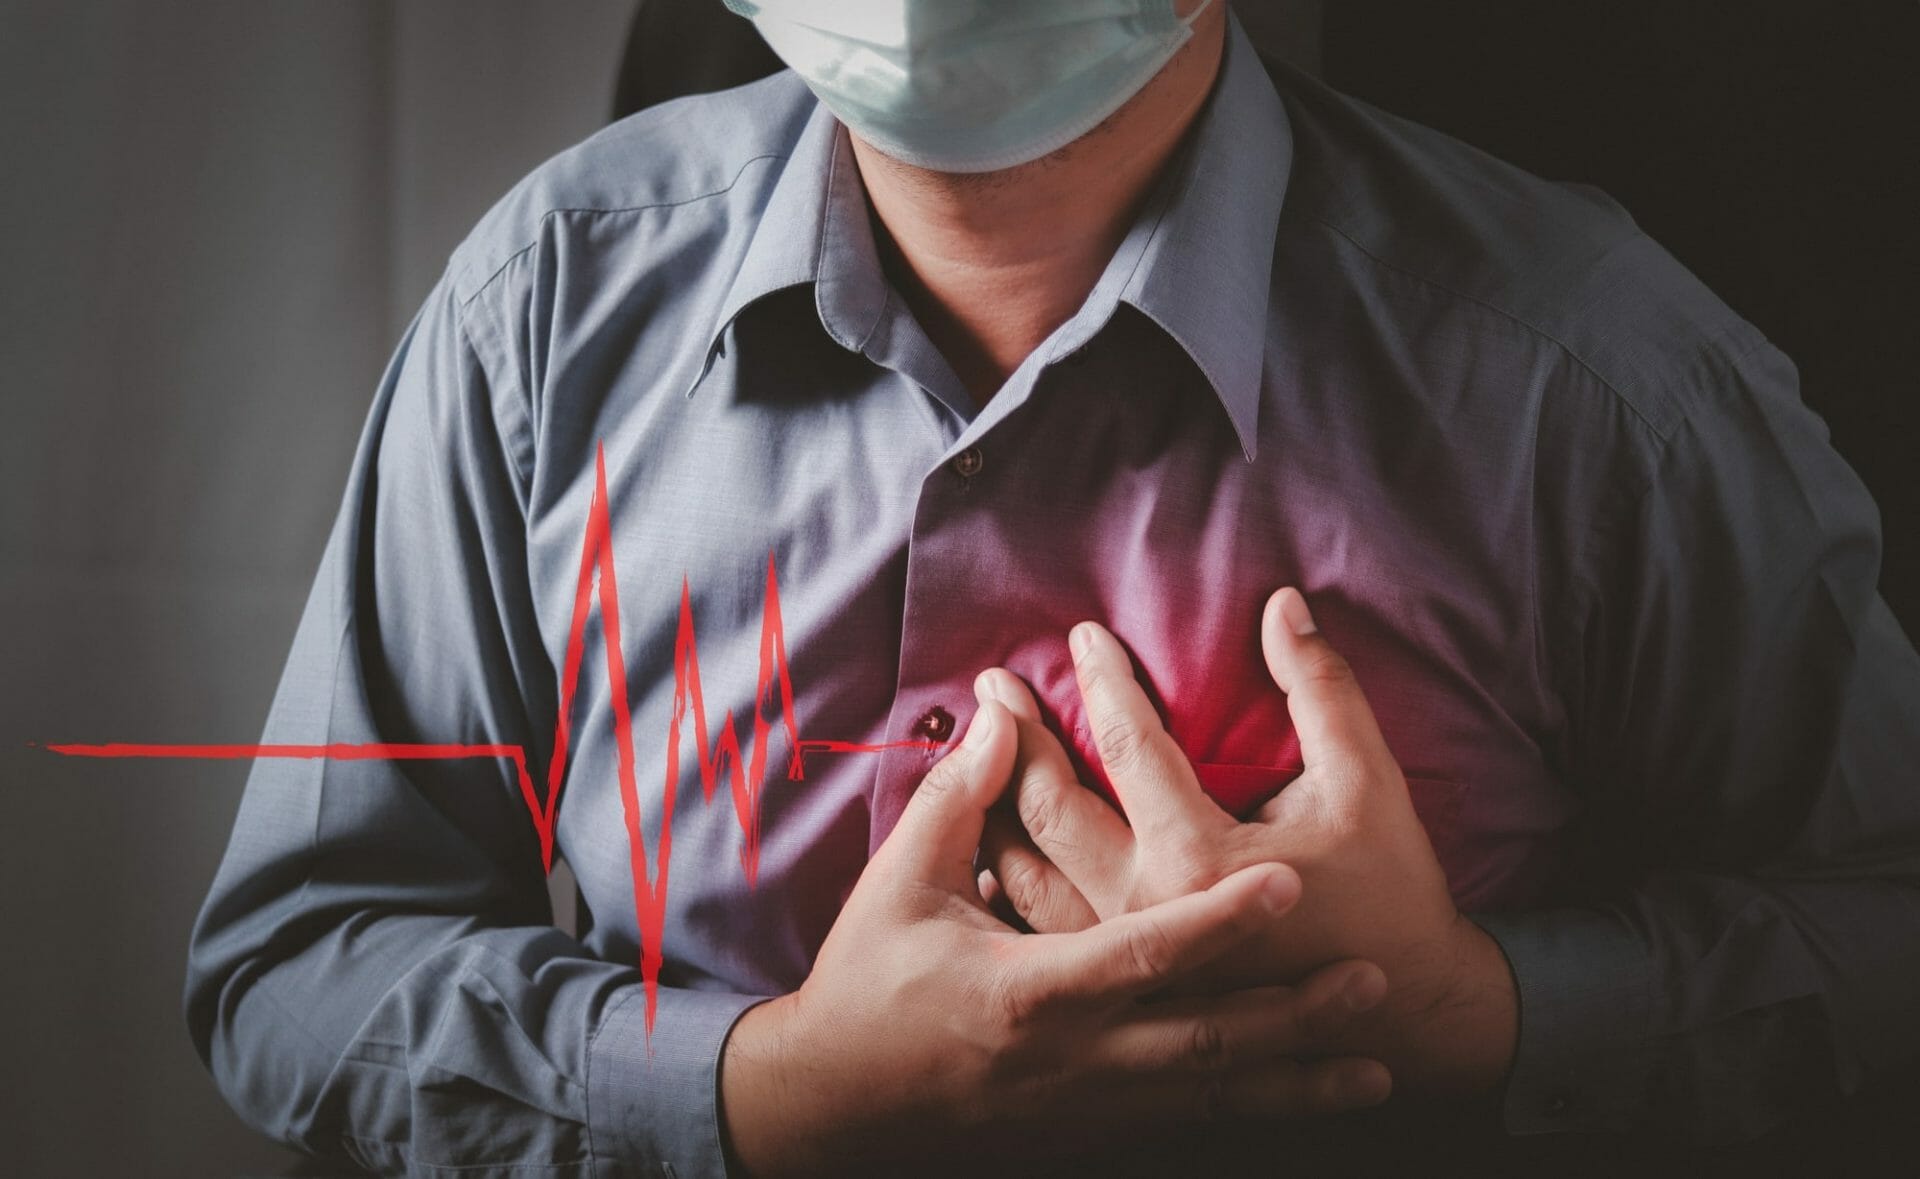 Heart attack: Causes, Symptoms and Management